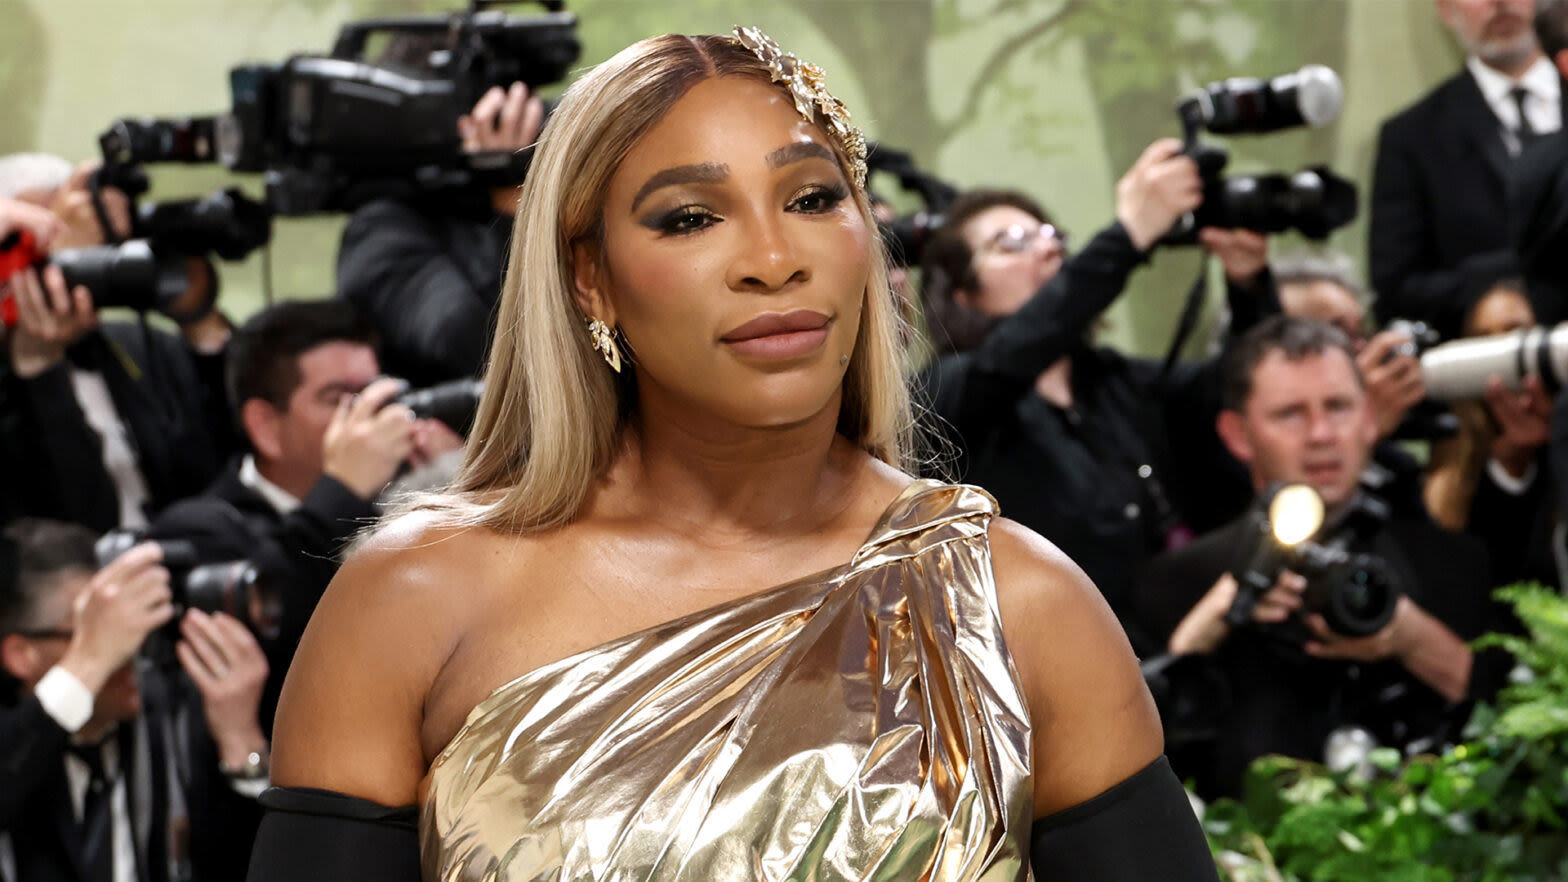 Serena Williams Had $94.8M In Prize Earnings During Her Tennis Career, But At One Point She Would Forget...